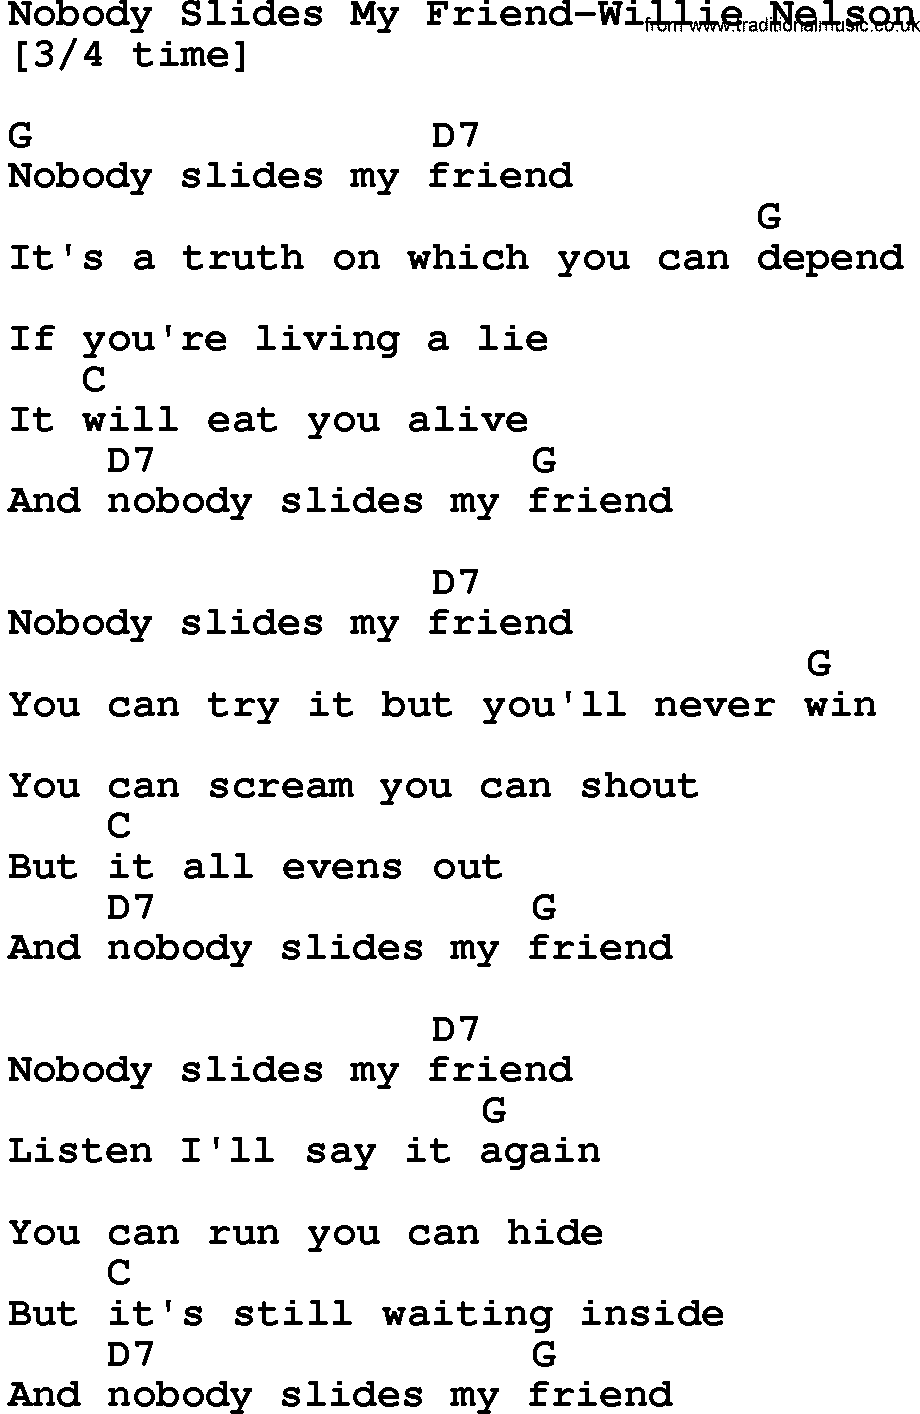 Country music song: Nobody Slides My Friend-Willie Nelson lyrics and chords